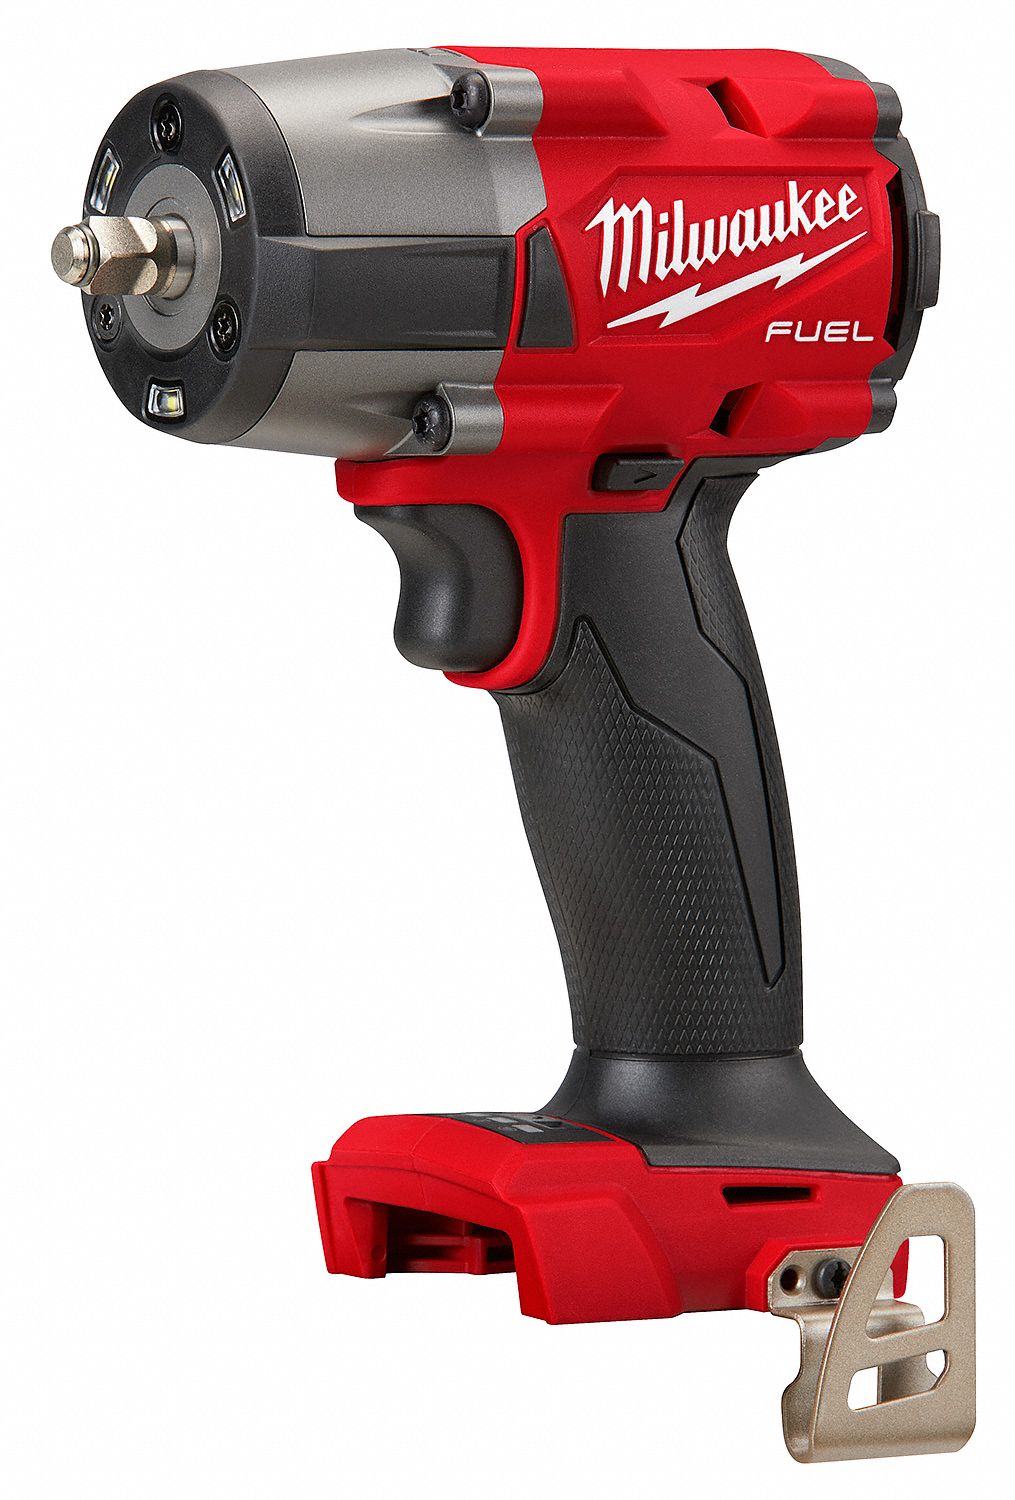 3/8 in Square Drive Size, 550 ft-lb Fastening Torque, Impact Wrench  60YT21|2960-20 Grainger